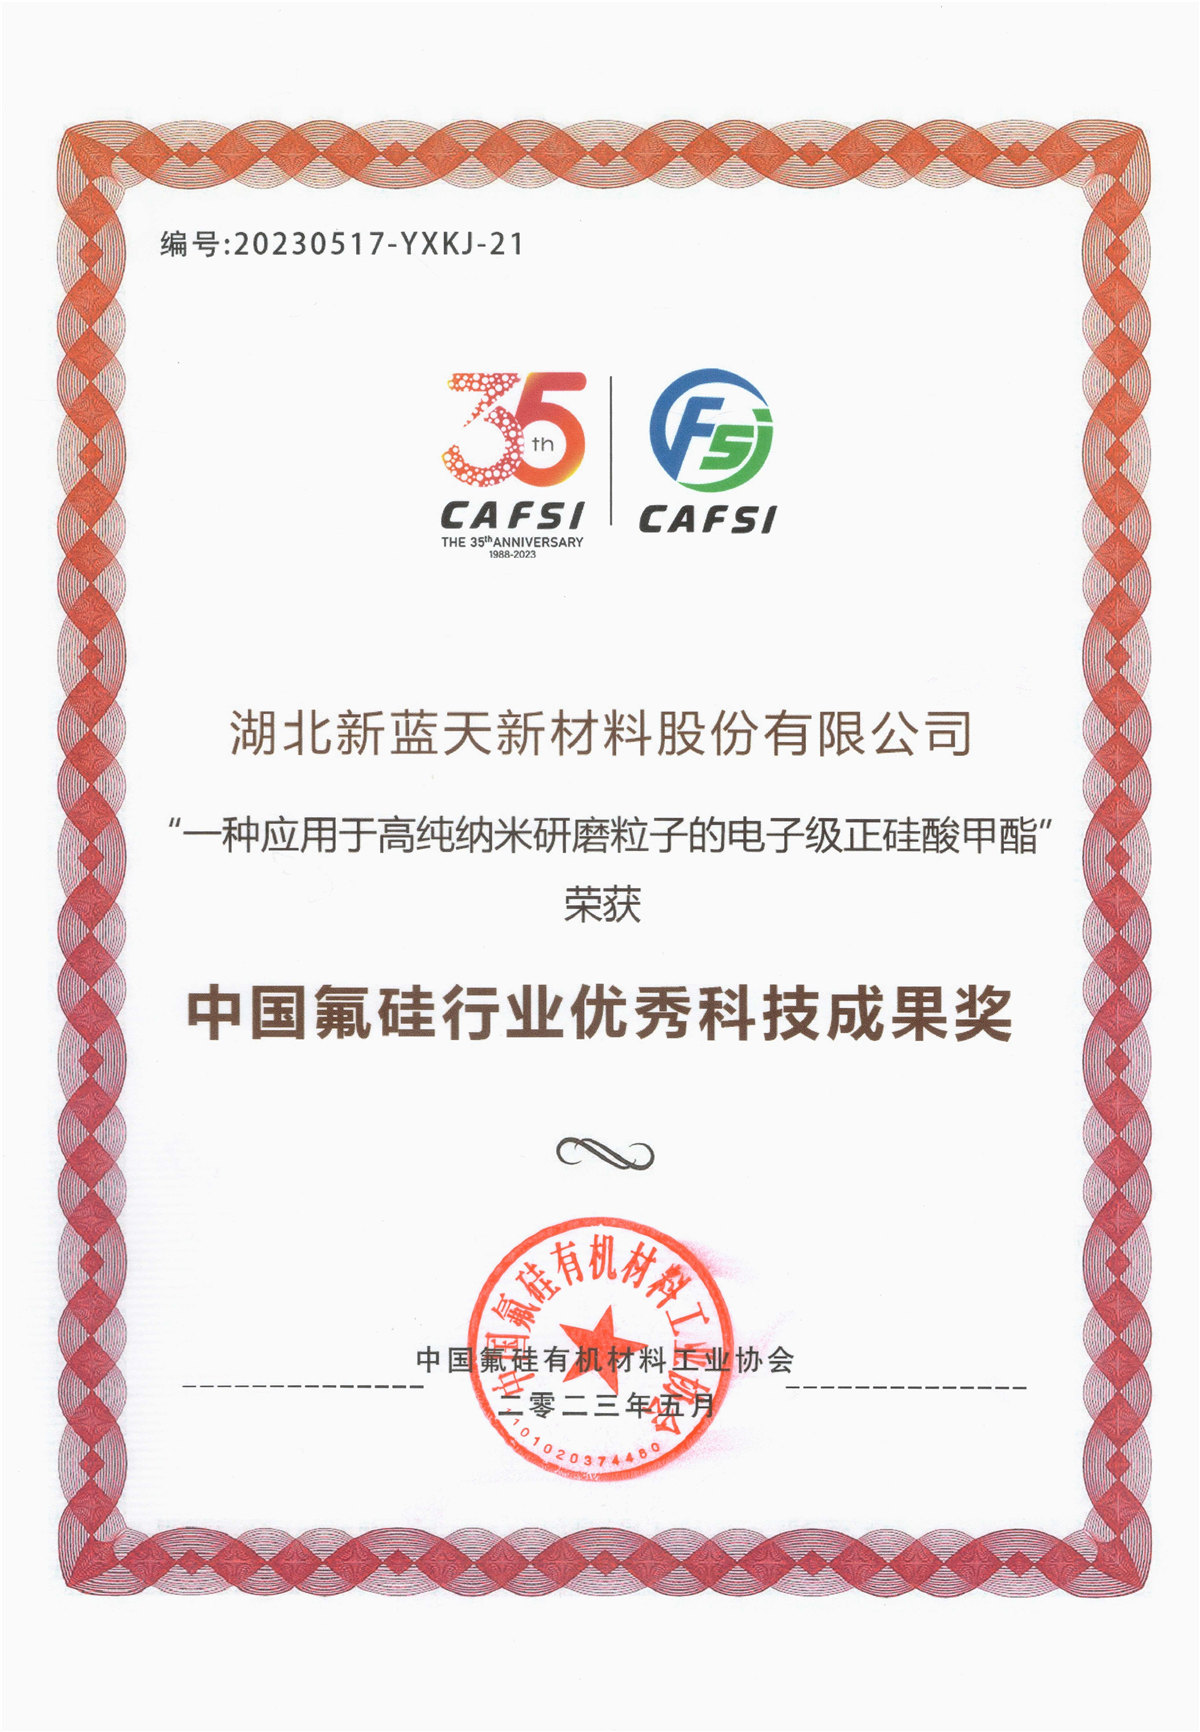 Outstanding Science and Technology Achievement Award in China's Fluorosilicon Industry